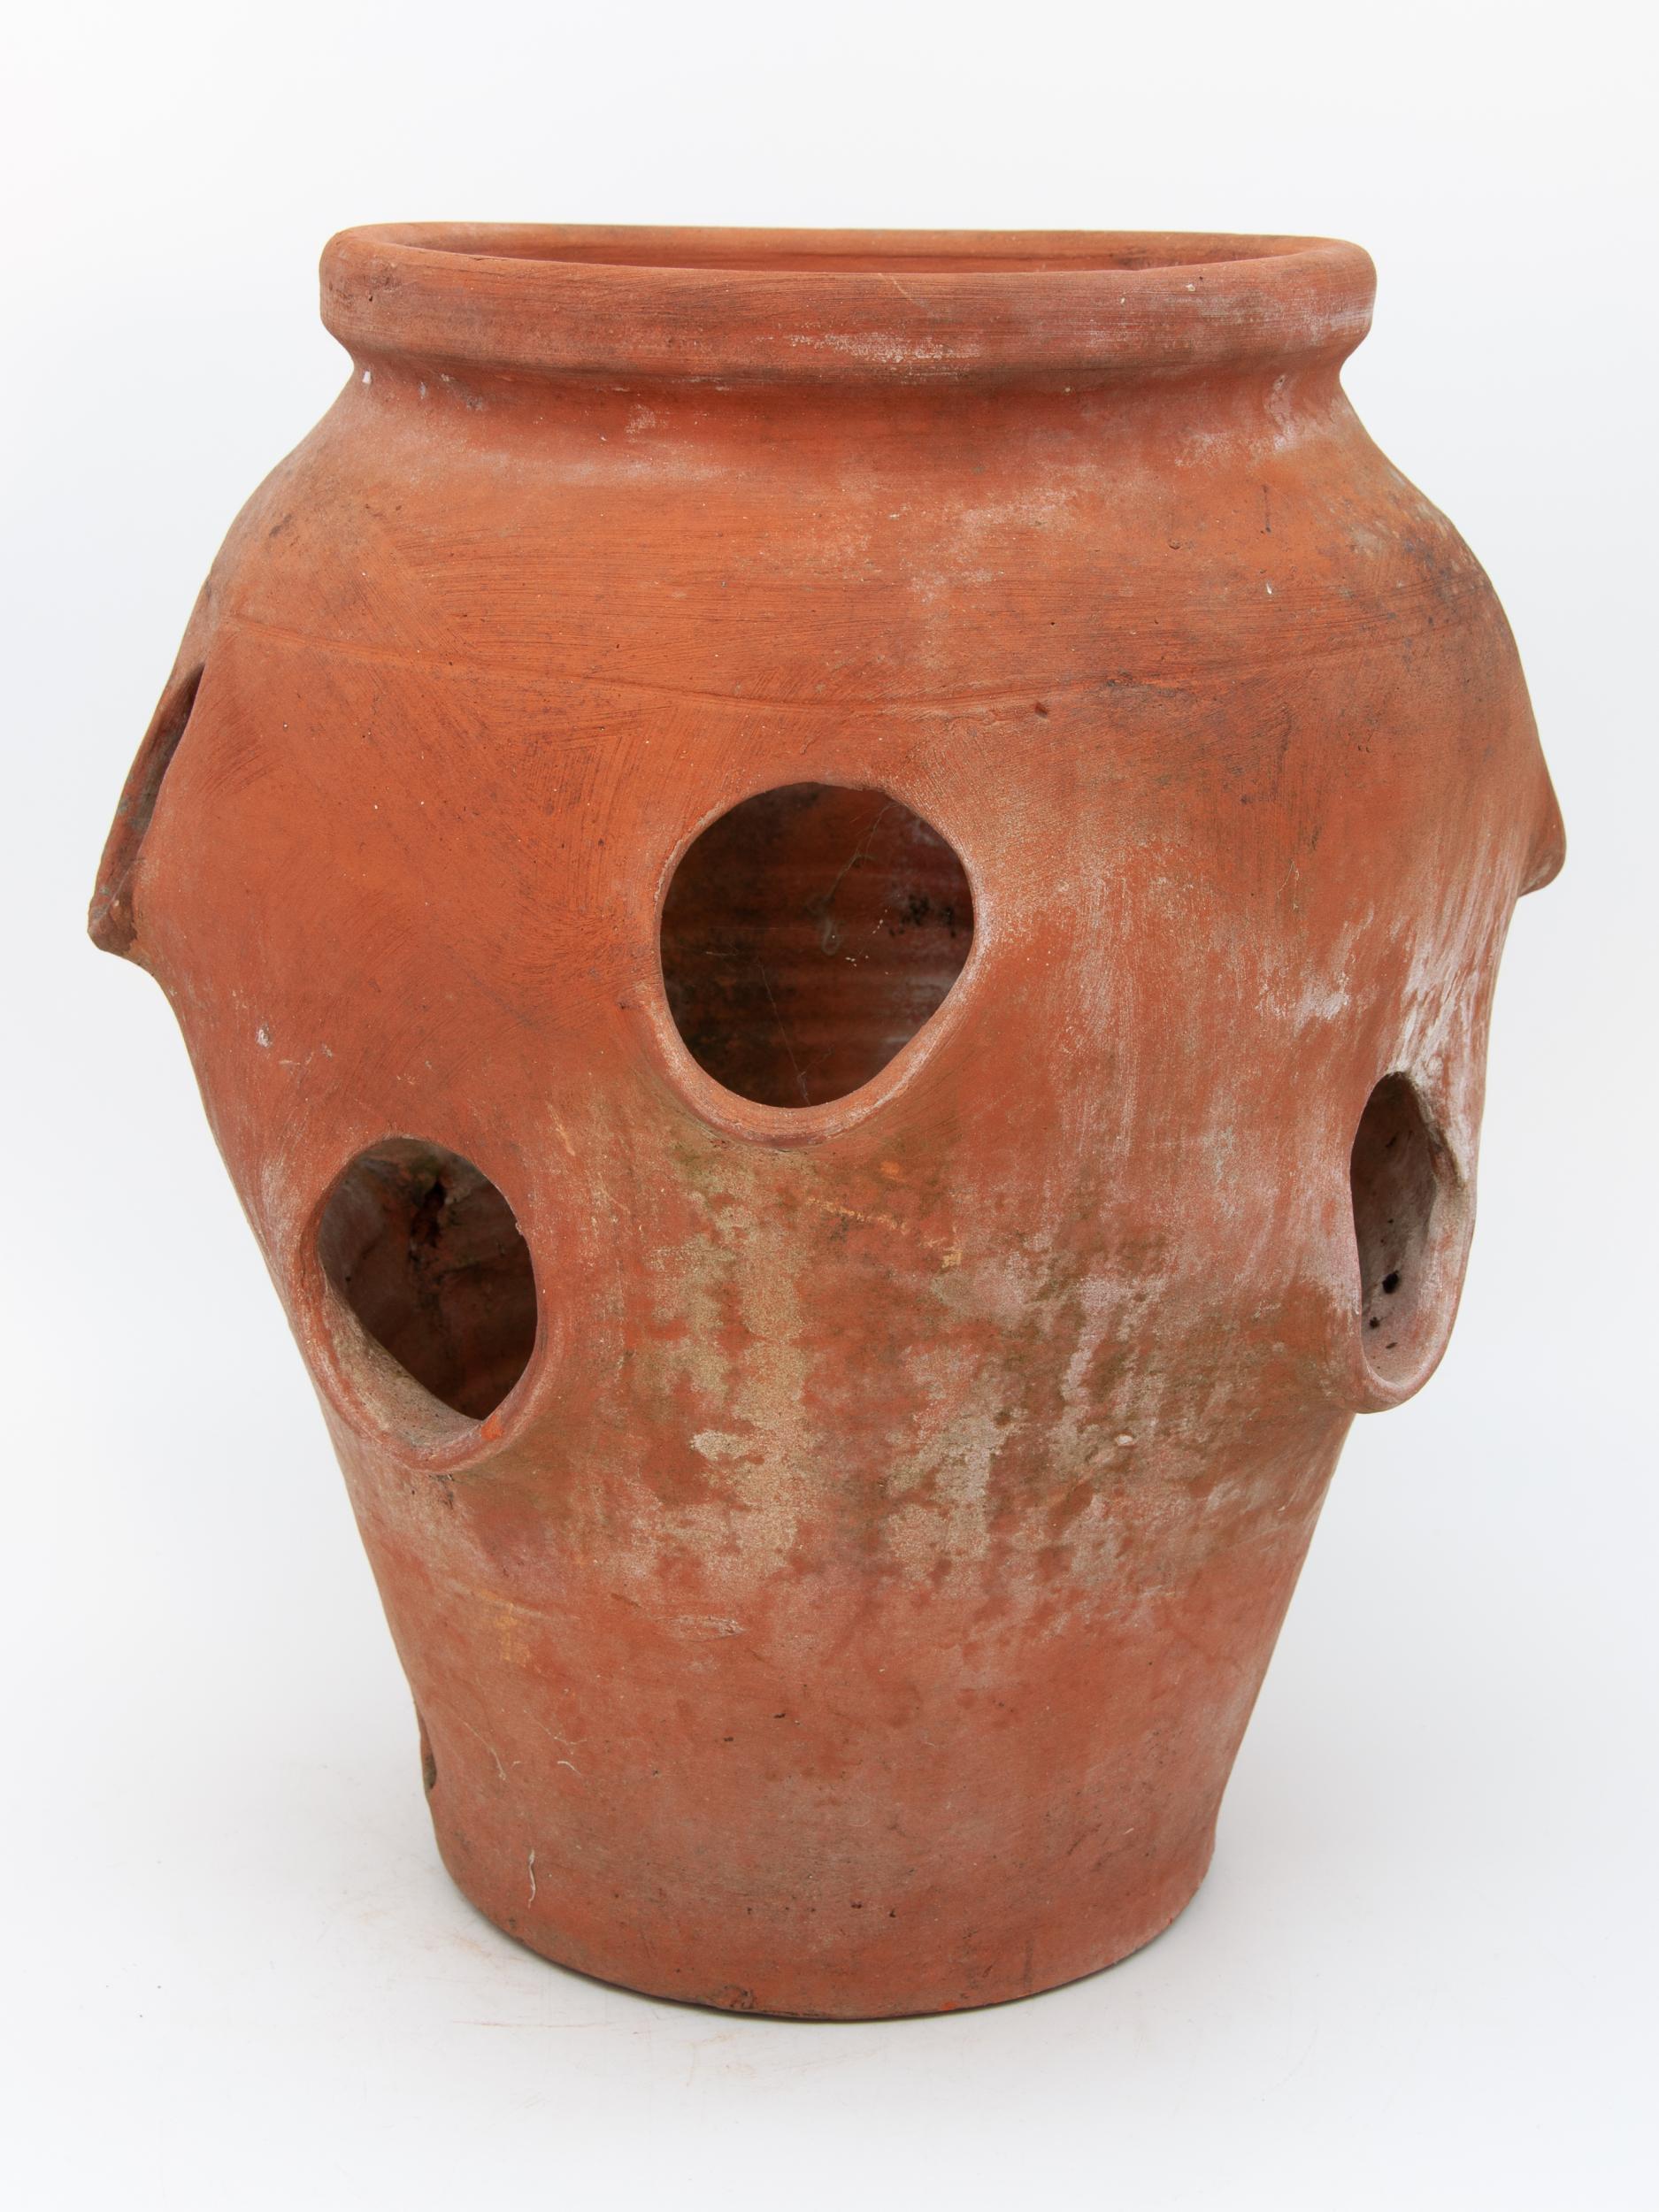 The shape and style of these pots have been perfected to grow Strawberries in. This Strawberry pot made from terracotta features side planting holes at two heights and has the classic urn shape with a generous opening at the top. Early 20th century.